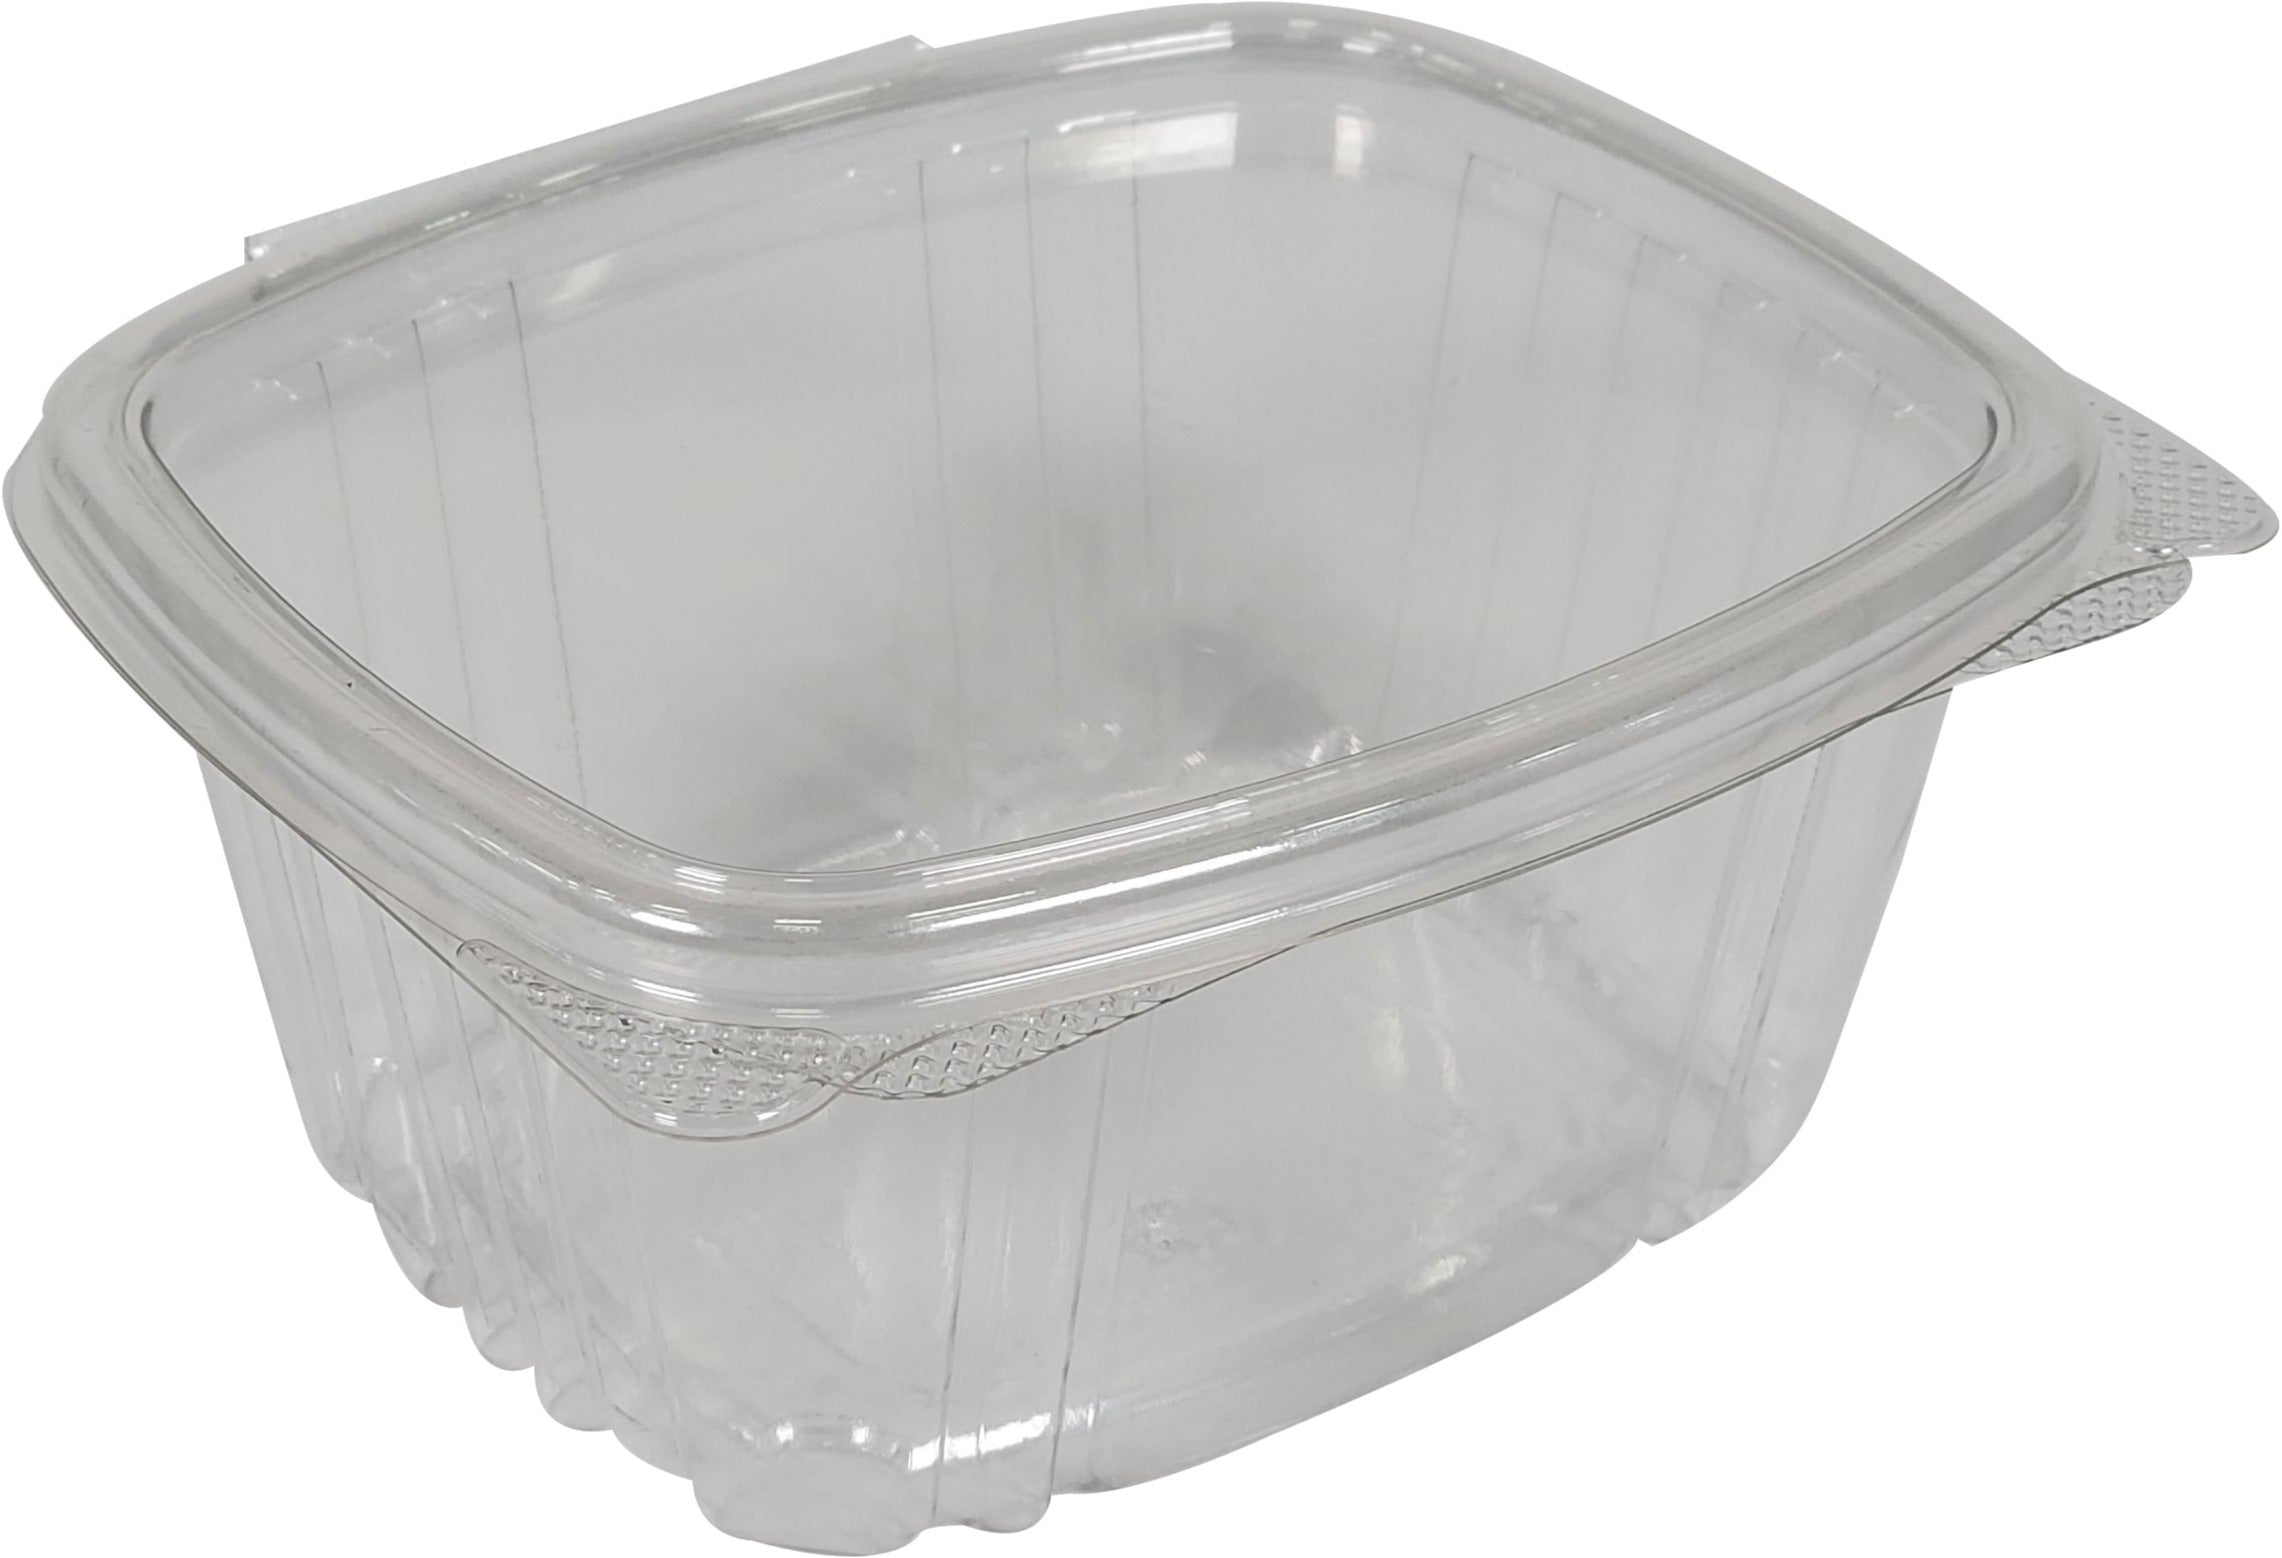 http://www.a1cashandcarry.com/cdn/shop/products/Genpak-Hinged-Deli-Container-Clear-16oz-AD16-Packaging-Genpak-Genpak-Hinged-Deli-Container-Clear-16oz-AD16-Packaging-Genpak-Genpak-Hinged-Deli-Container-Clear-16oz-AD16-Packaging-Genp_9cb035fc-8c77-4f34-9a9d-360f4c24f44b.jpg?v=1697941747